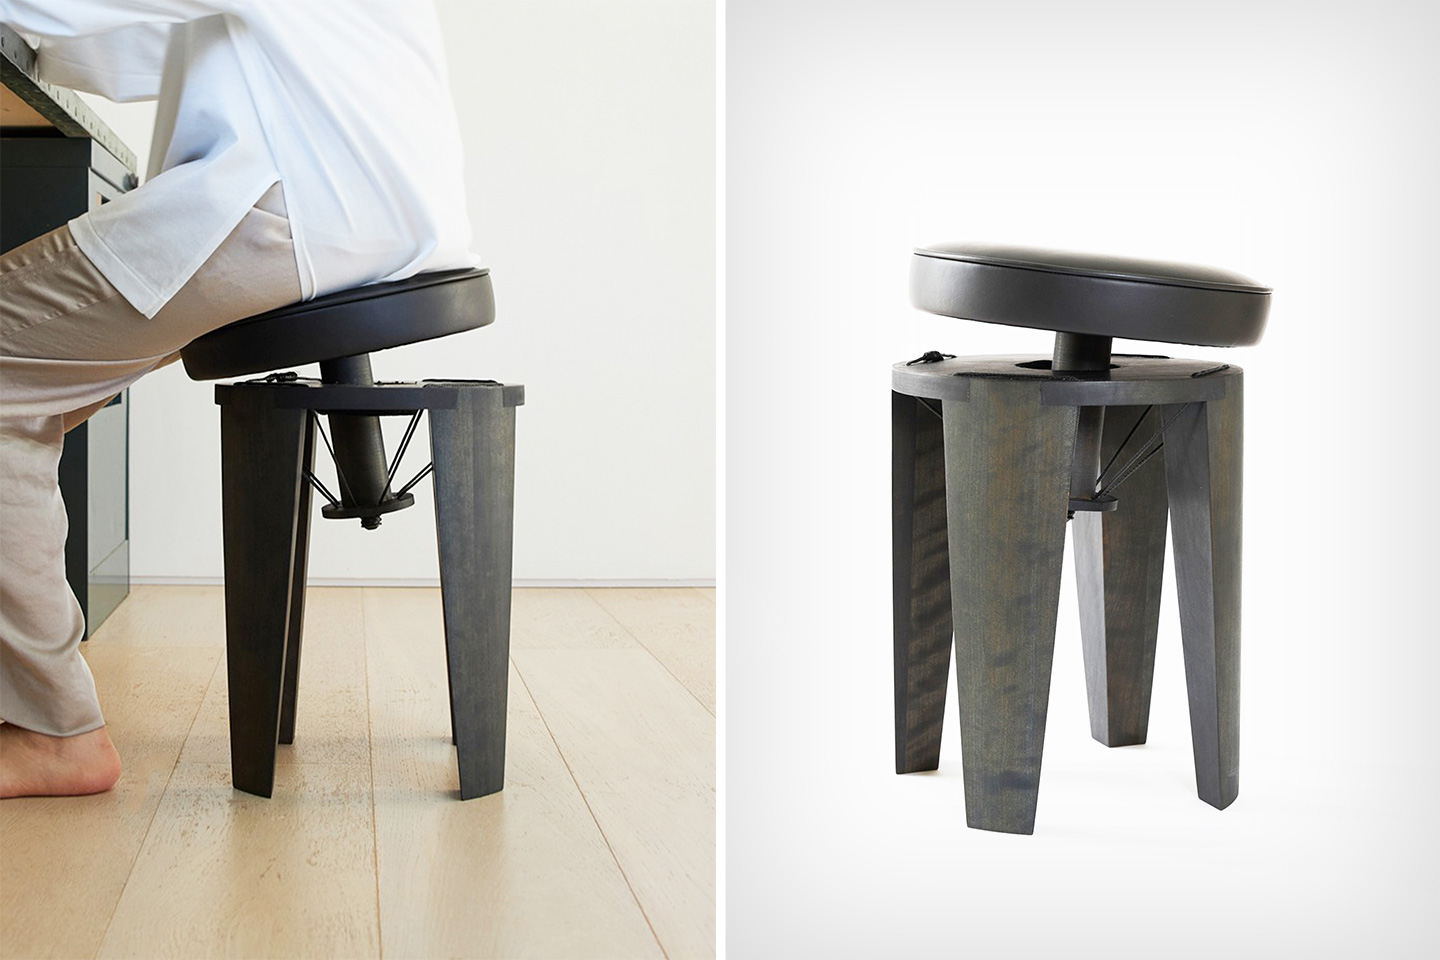 #Quirky stool with a tensile suspended seat gives you the effect of a bouncing cushion!